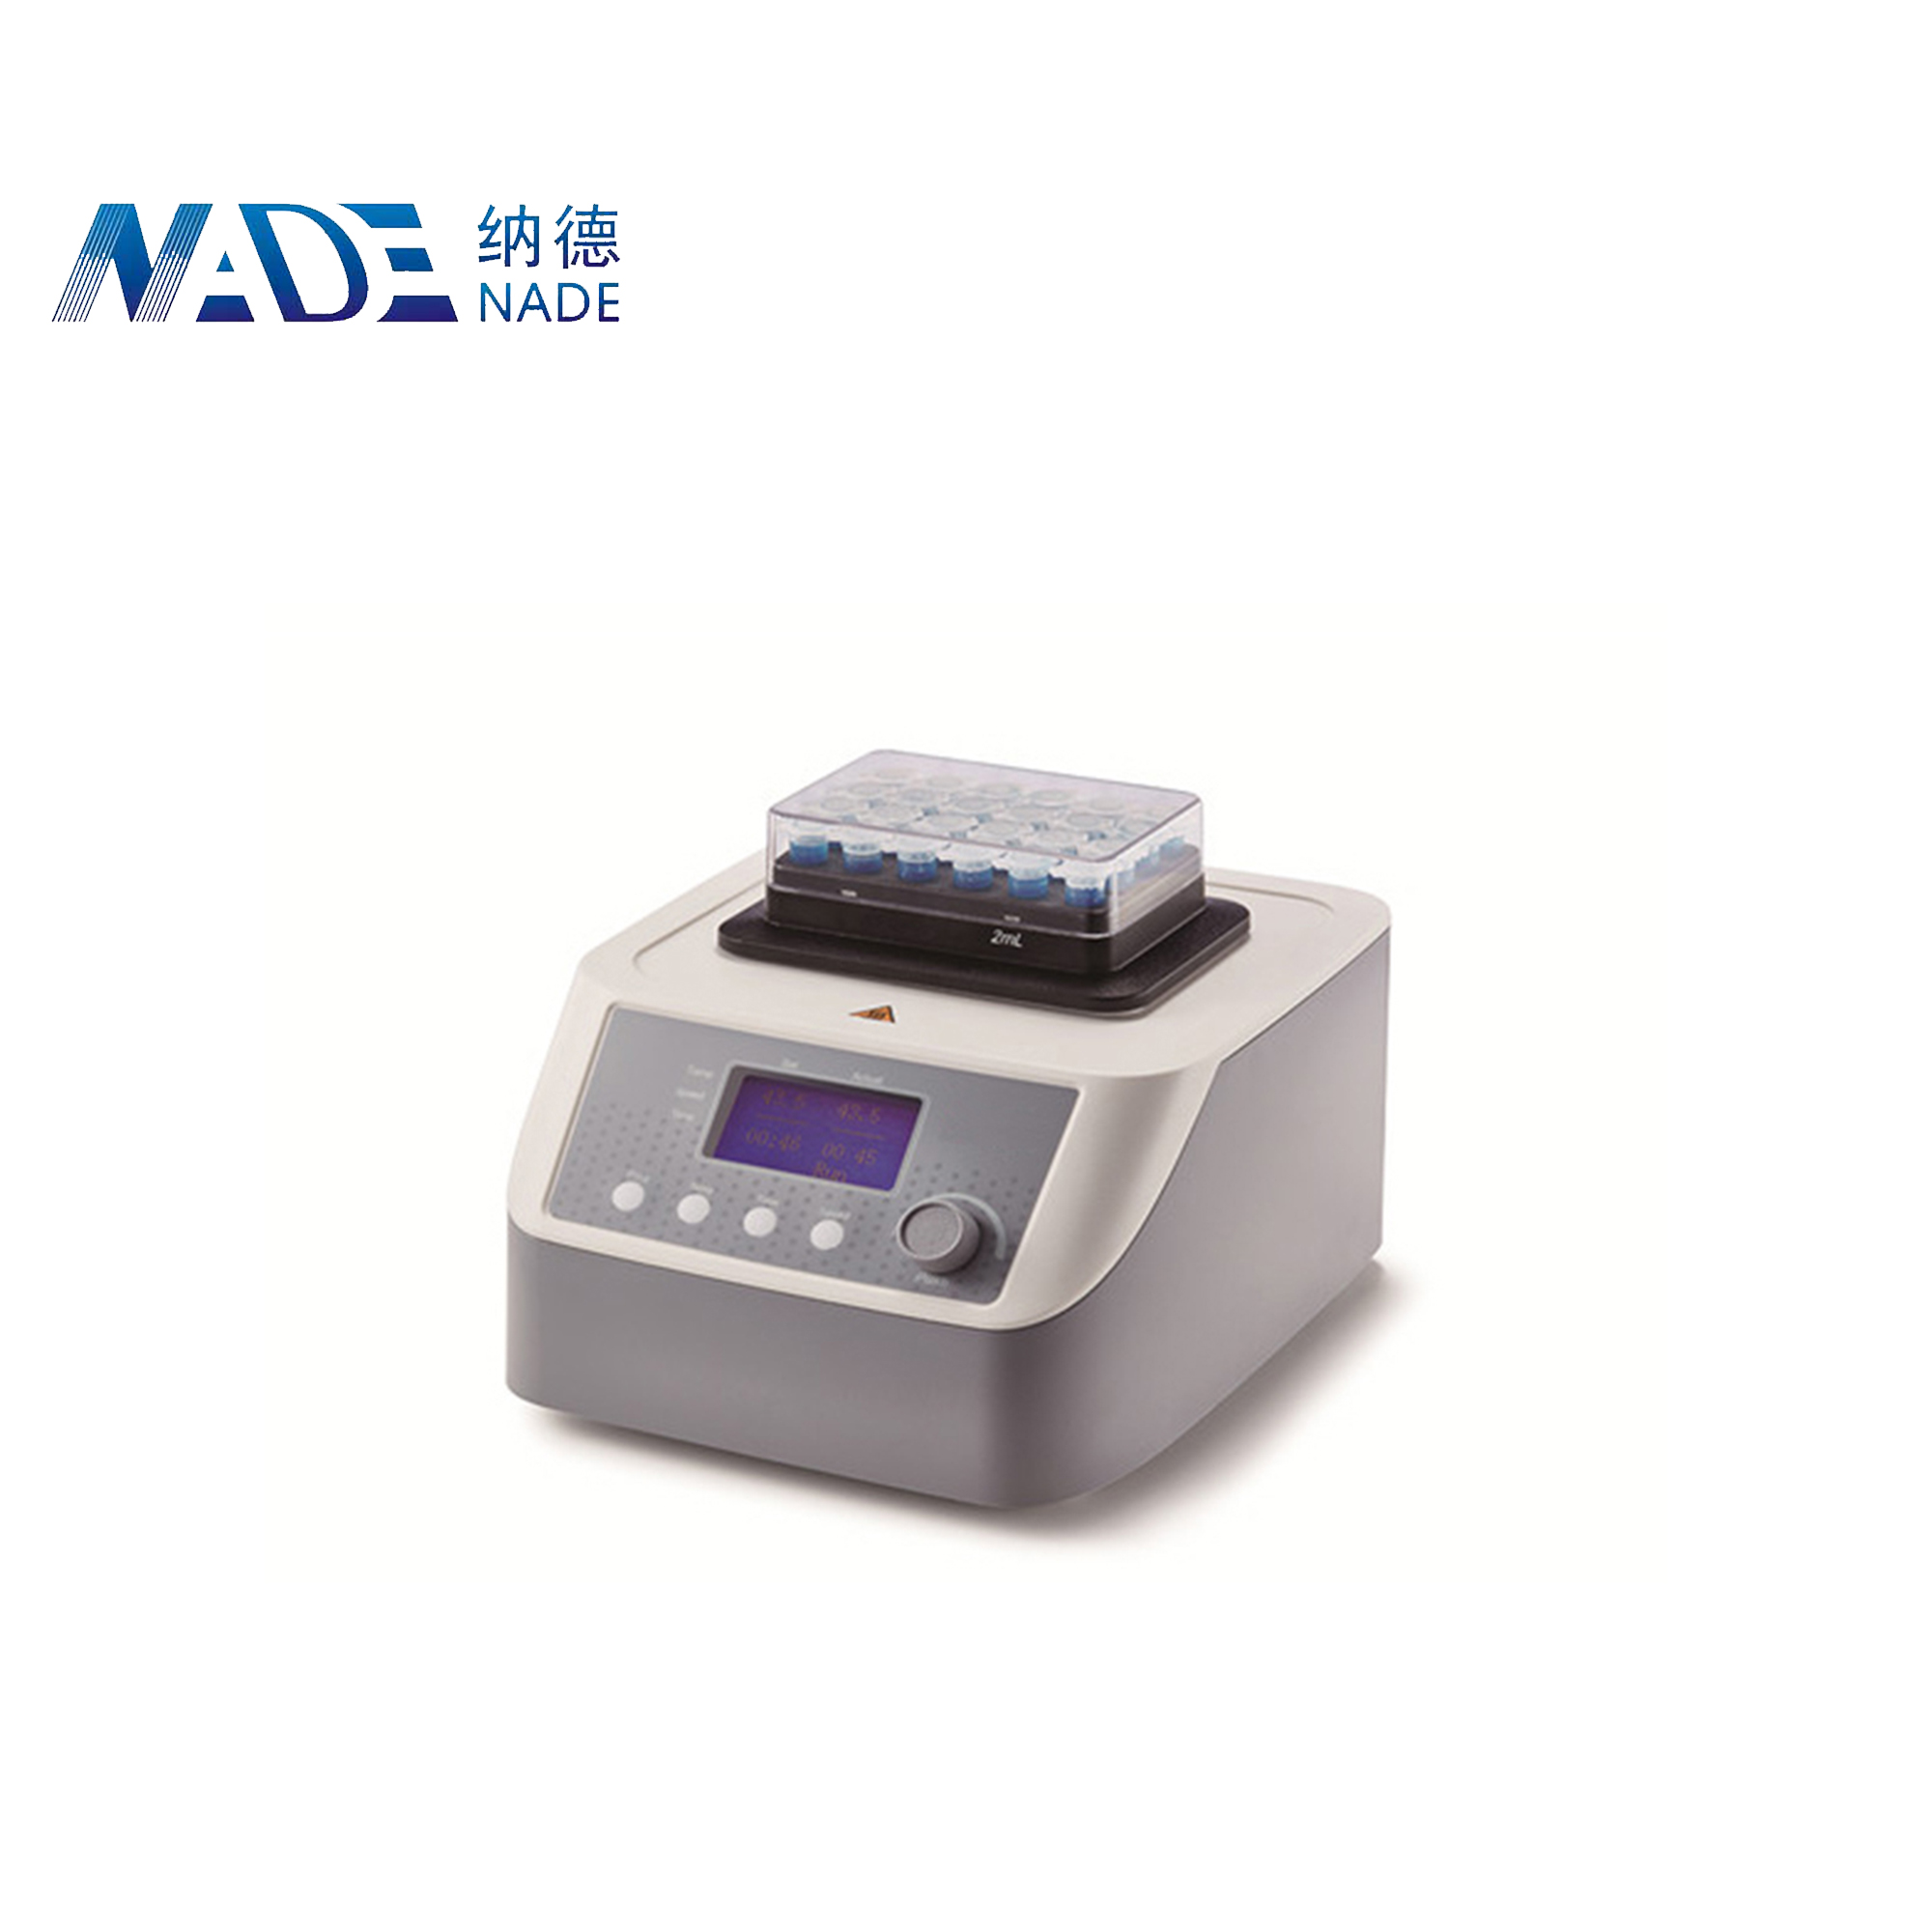 NADE Dry Block Heaters HCM100-Pro heating&cooling&mixing Block Thermo Mix Dry Bath Incubator with a lid for heat preservation